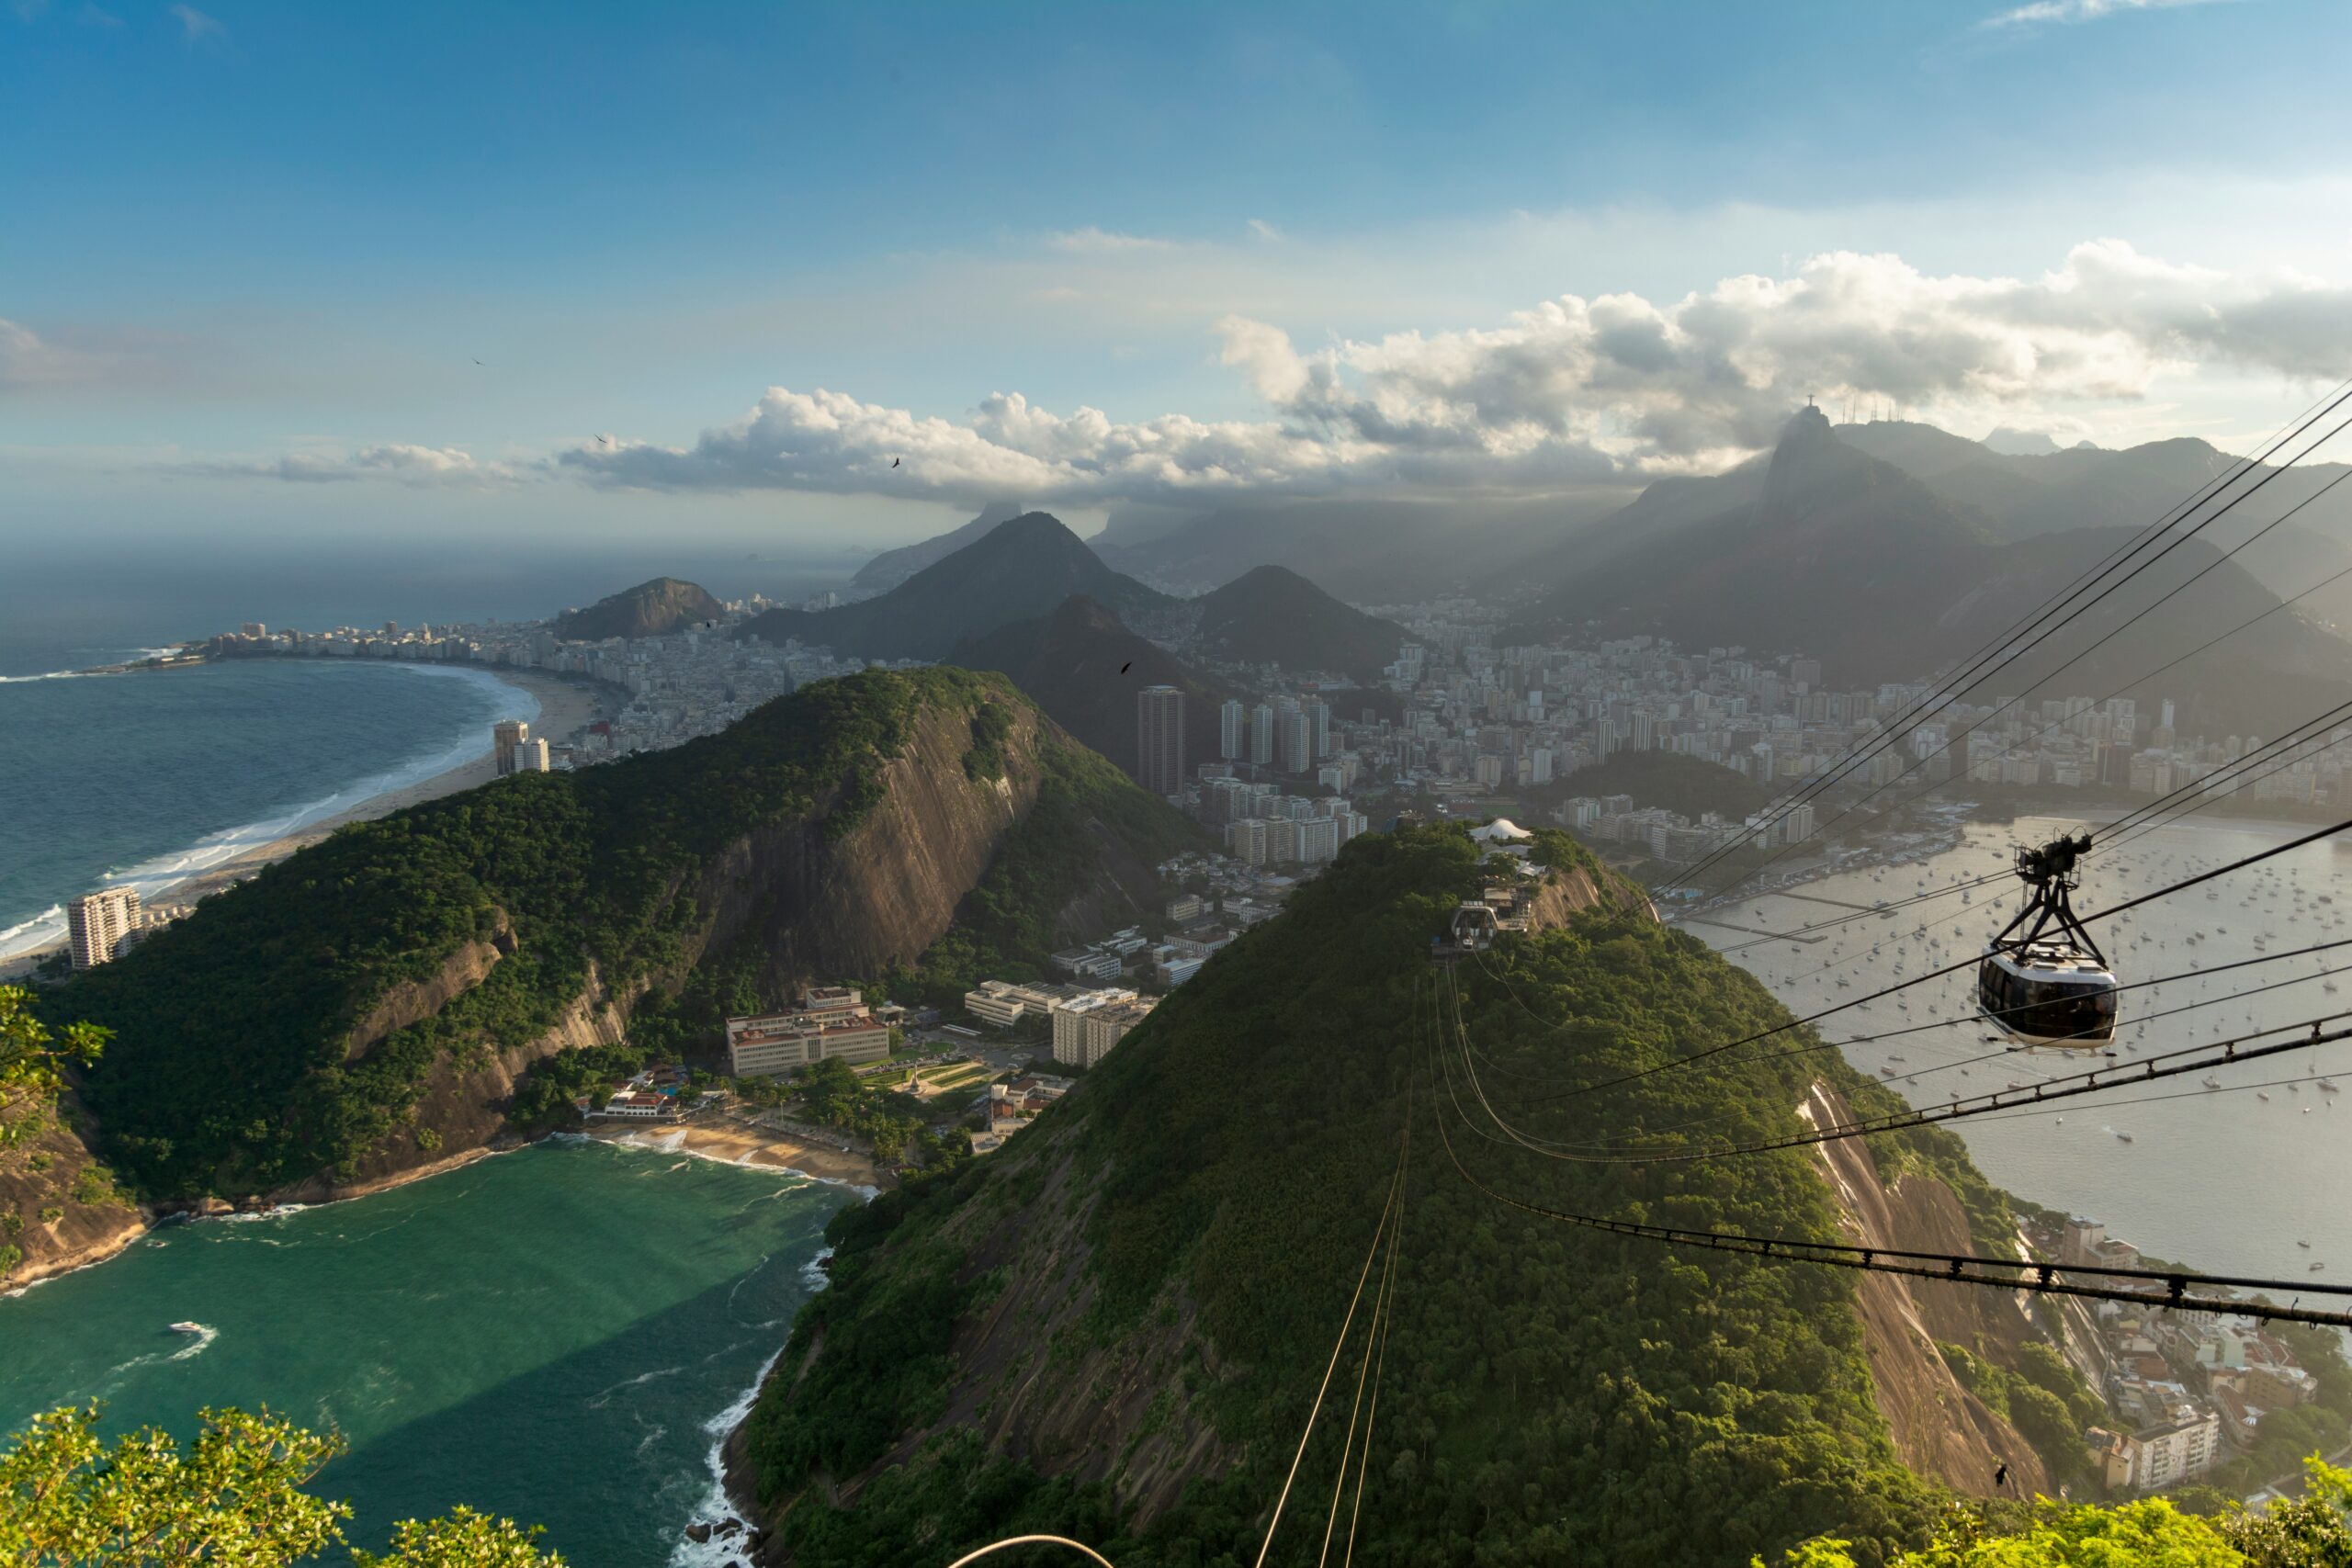 Rio de Janeiro is a pretty safe destination for tourists, but it has its downfalls that travelers should stay aware of.
pictured: Rio's wondrous mountains and cable car system